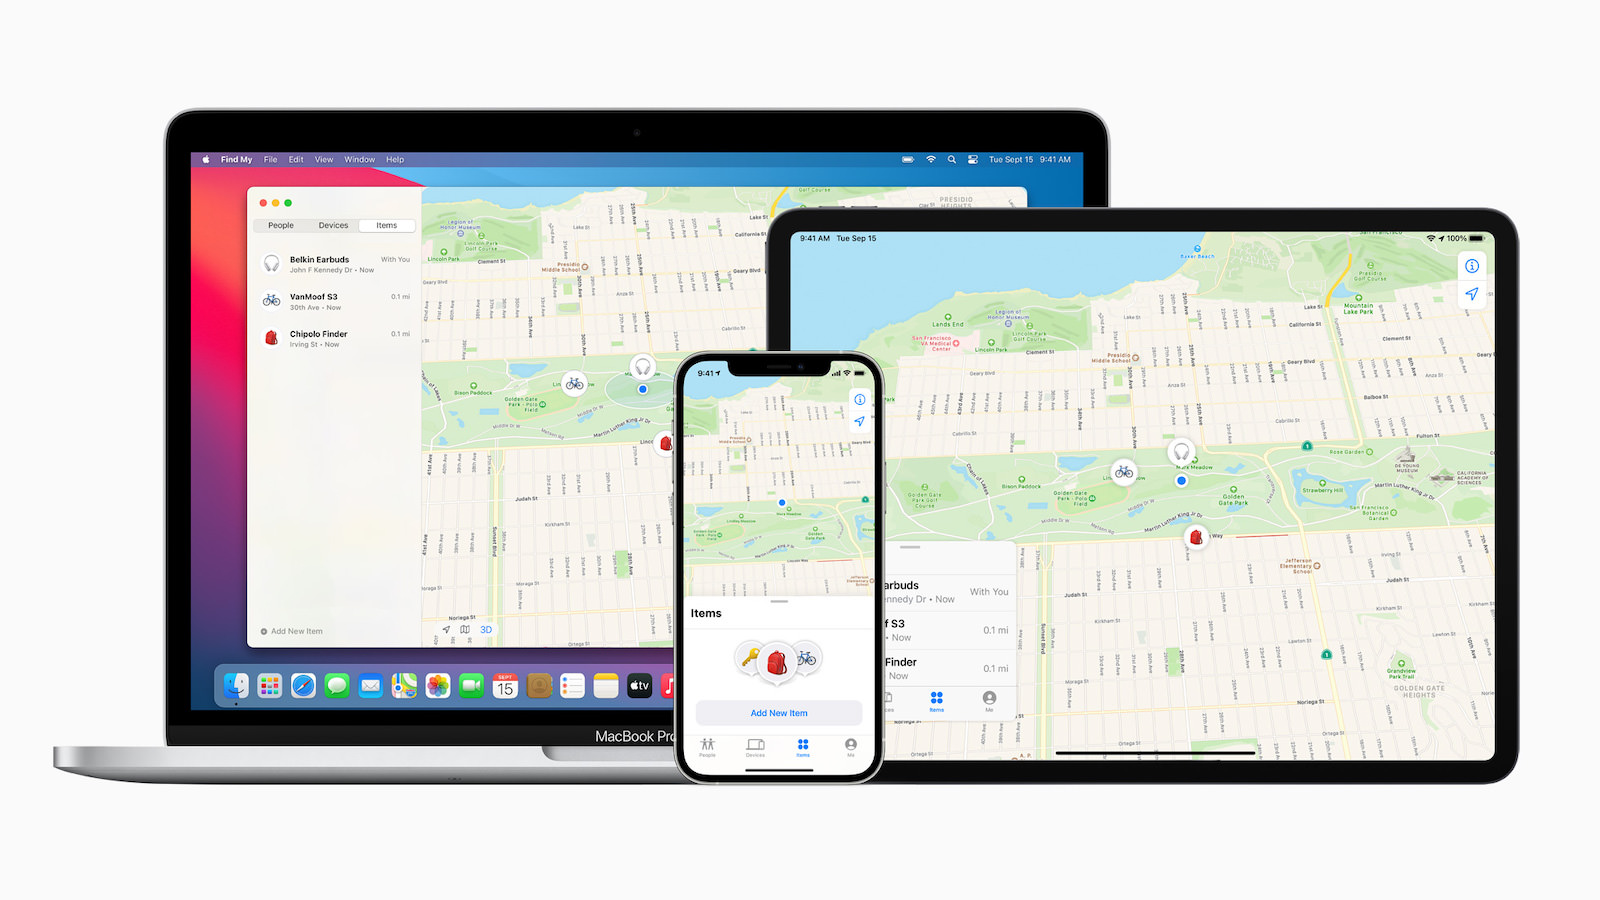 Apple find my network now offers new third party finding experiences macbookpro ipadpro iphone12pro 040721